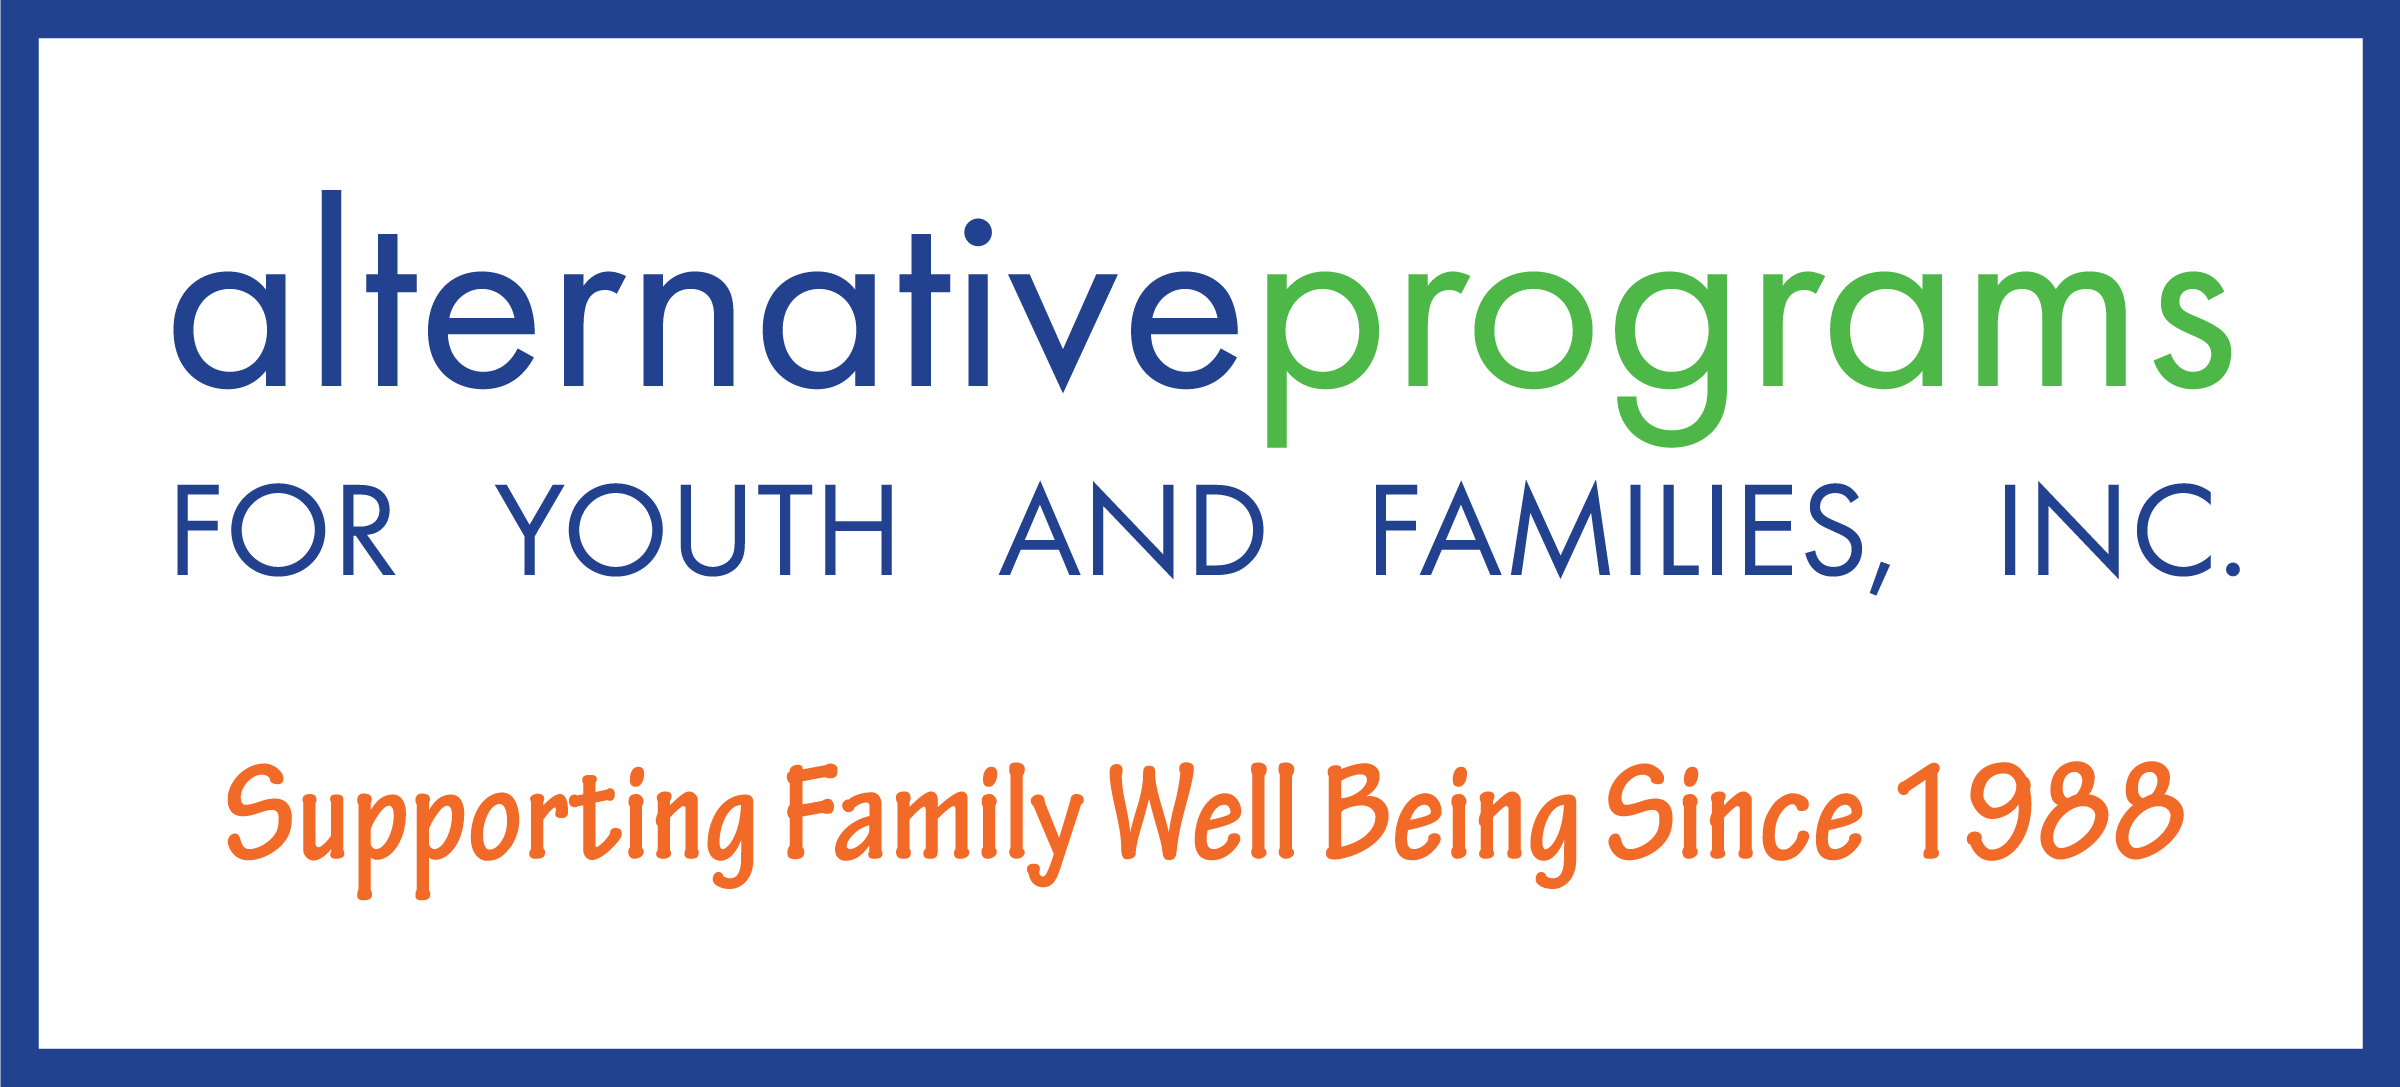 Alternative Programs for Youth and Families Inc.